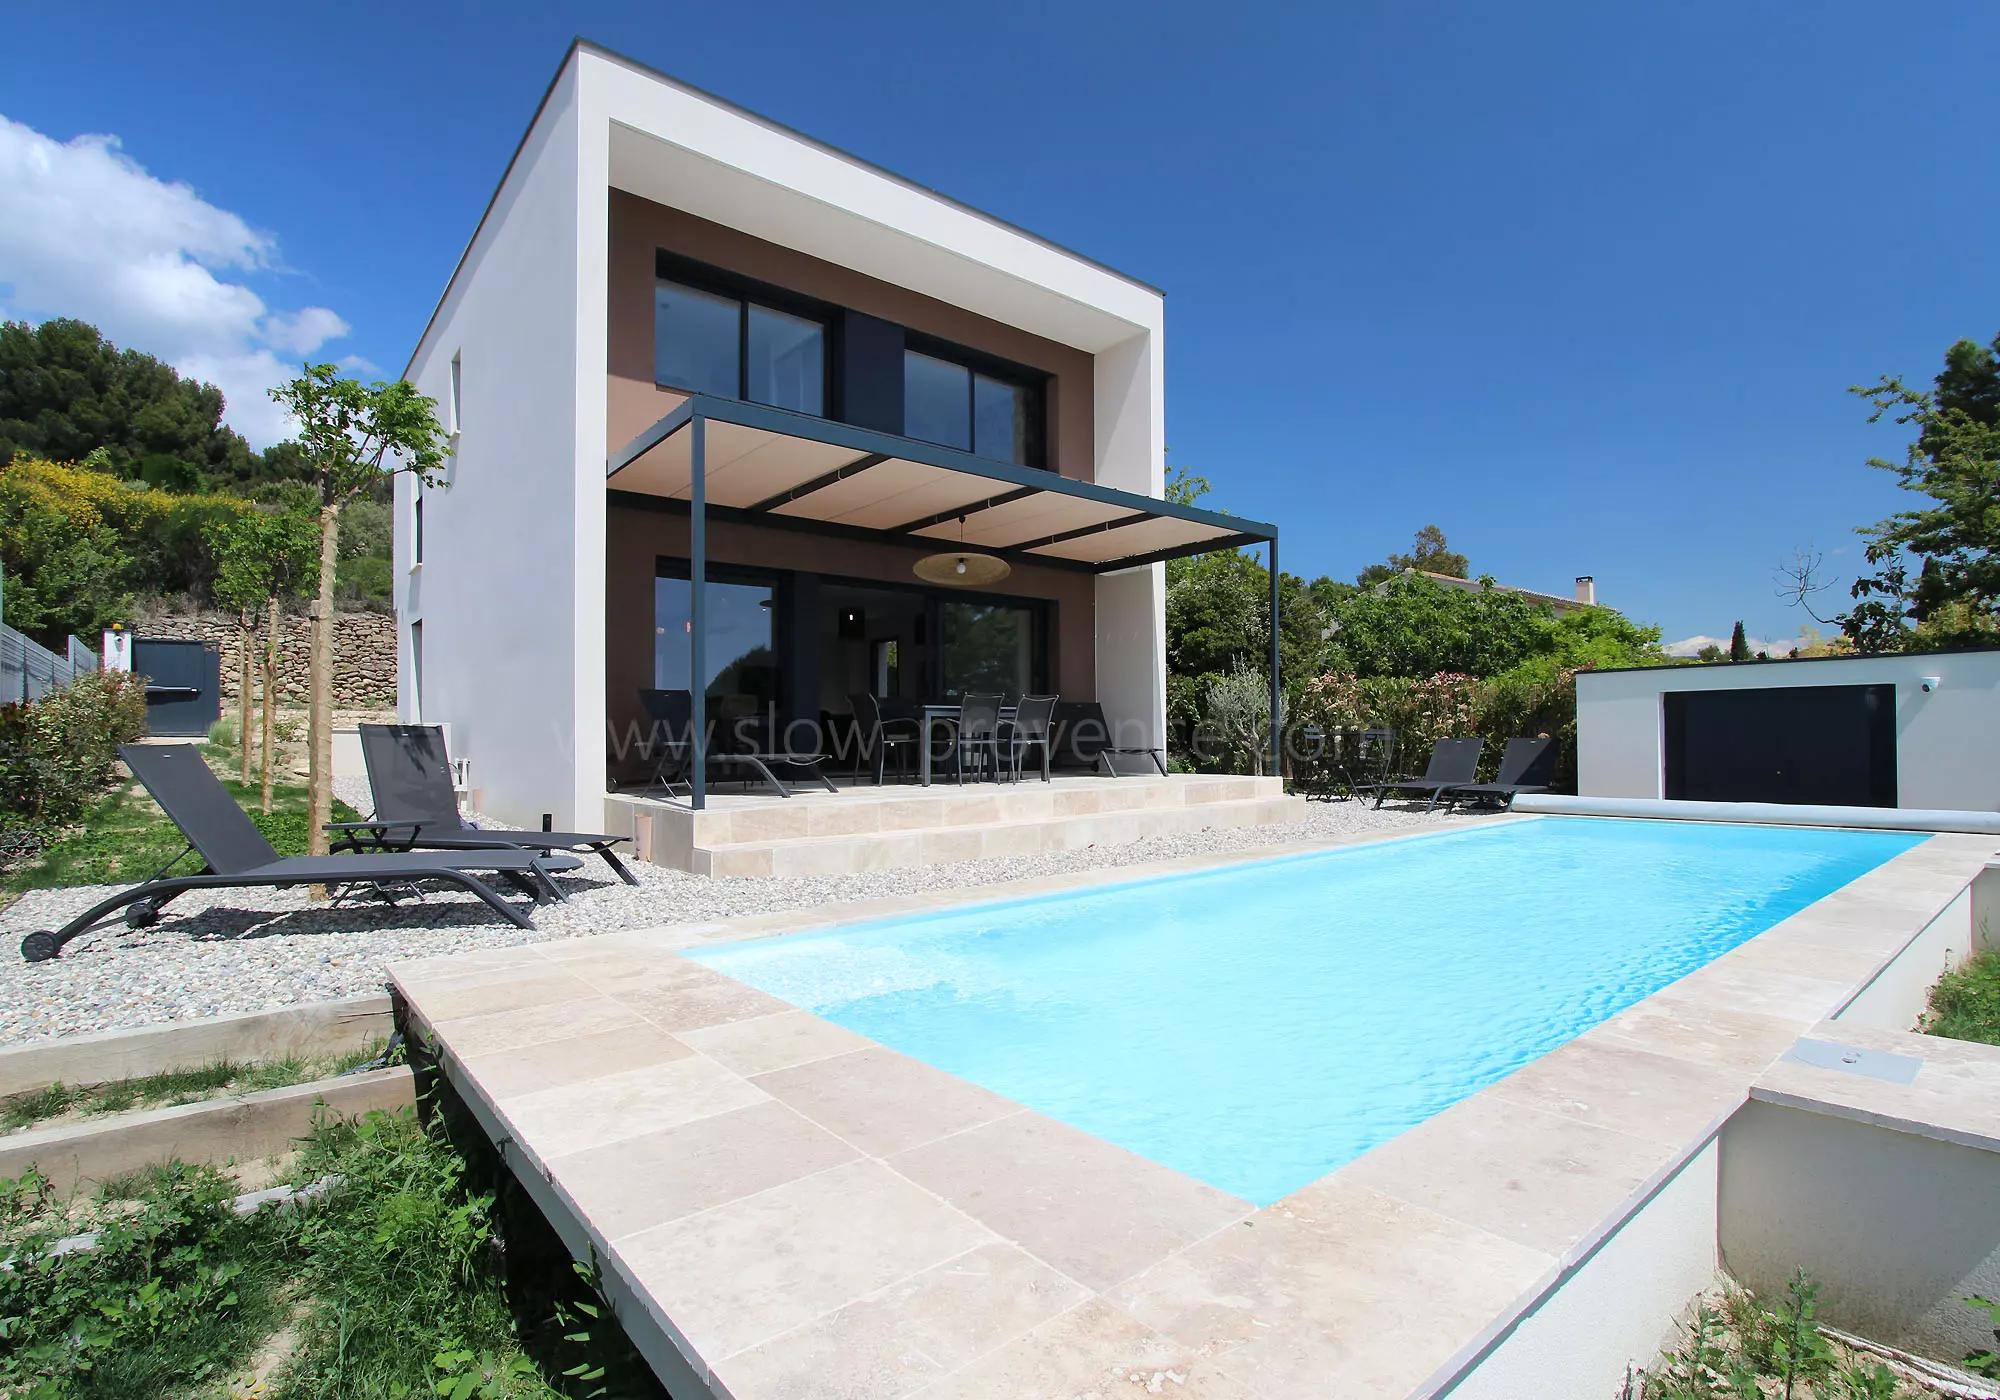 Contemporary villa with breathtaking views over Bedoin